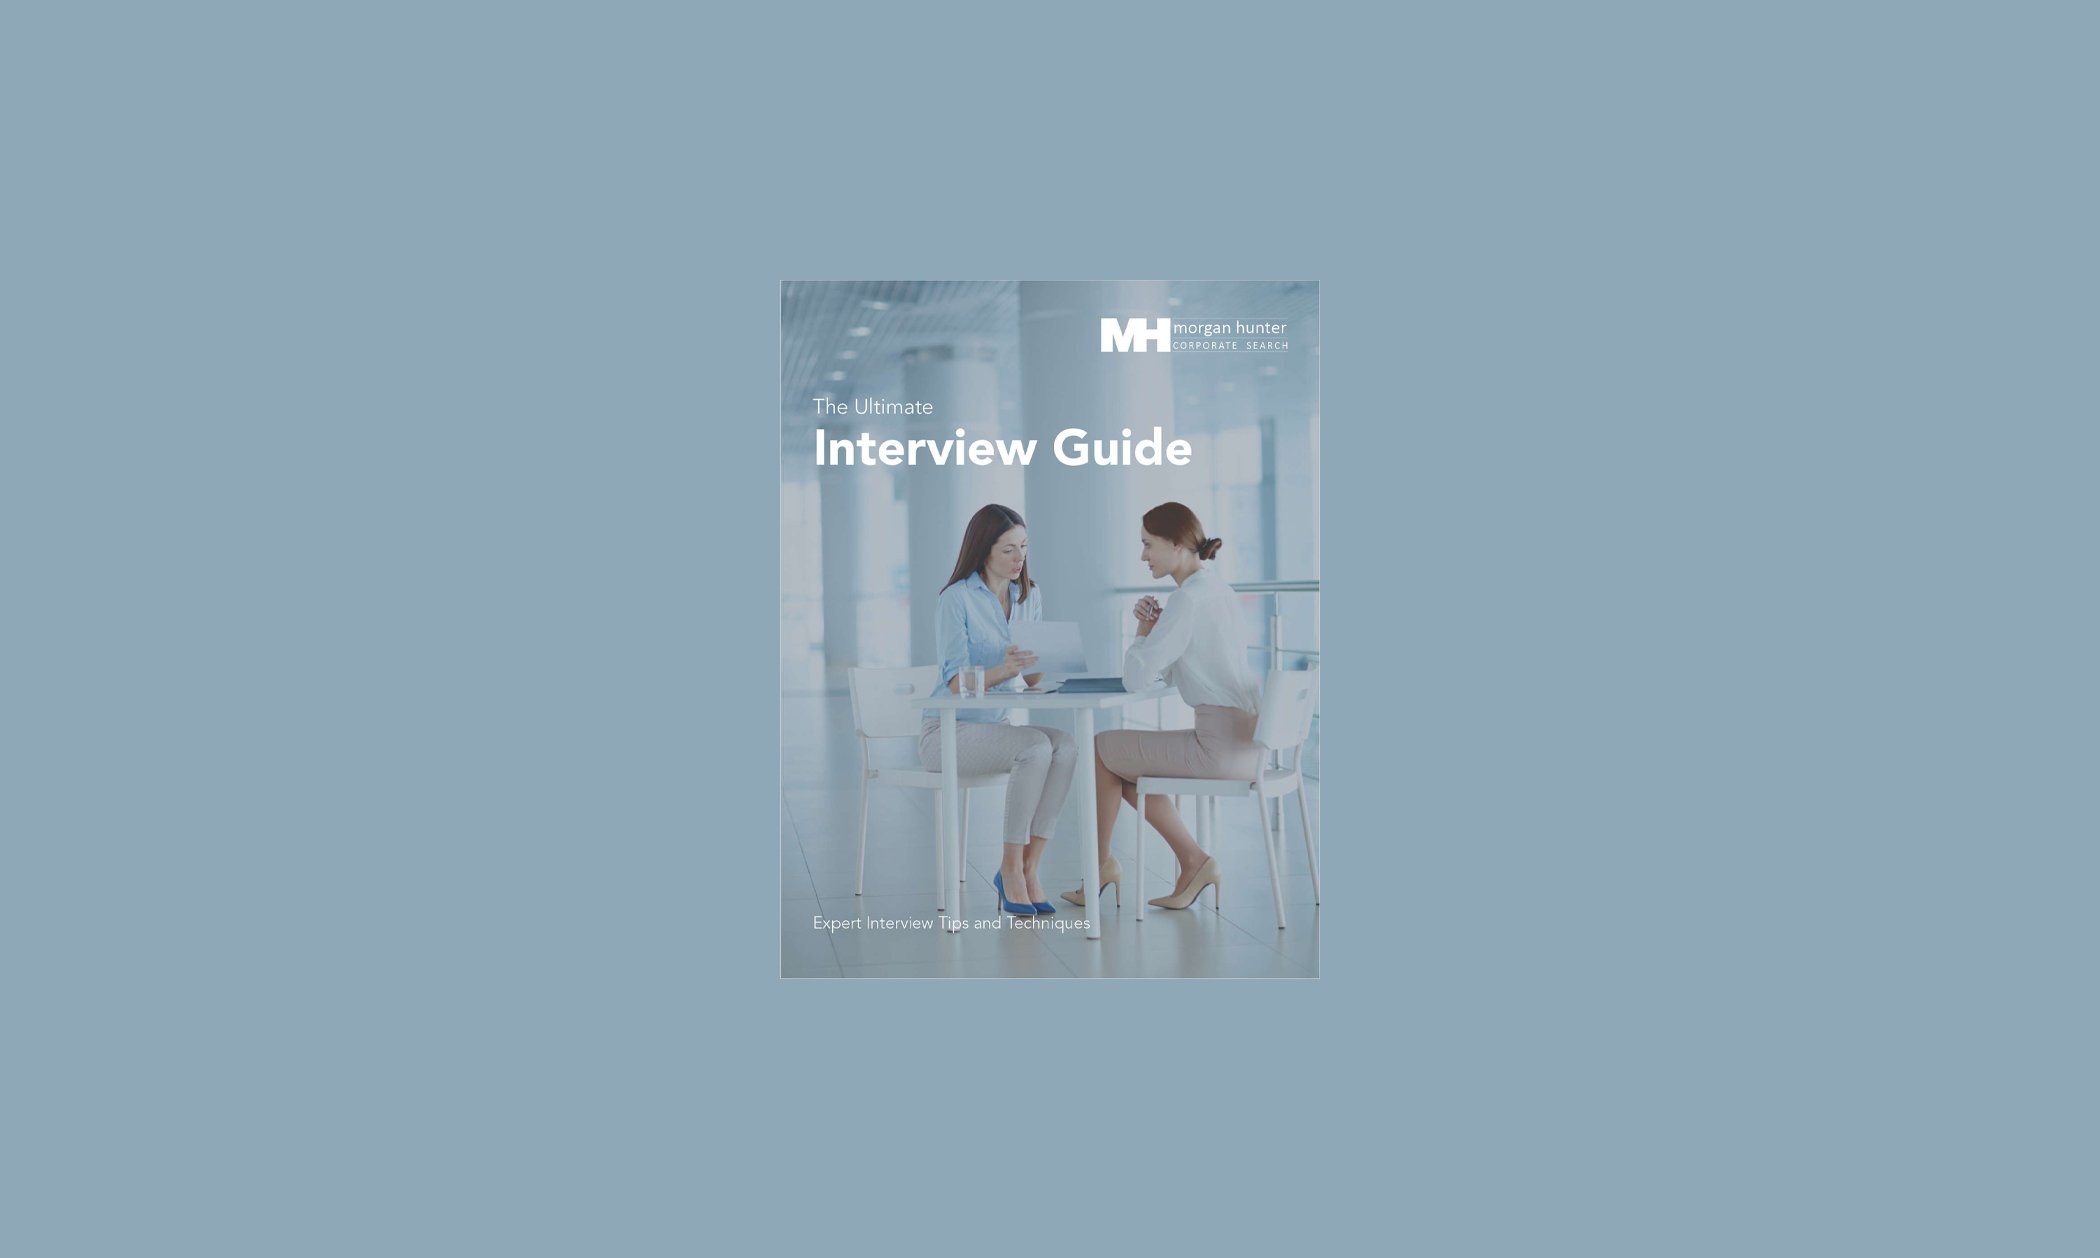 Claim Your FREE The Ultimate Interview Guide From Morgan Hunter!